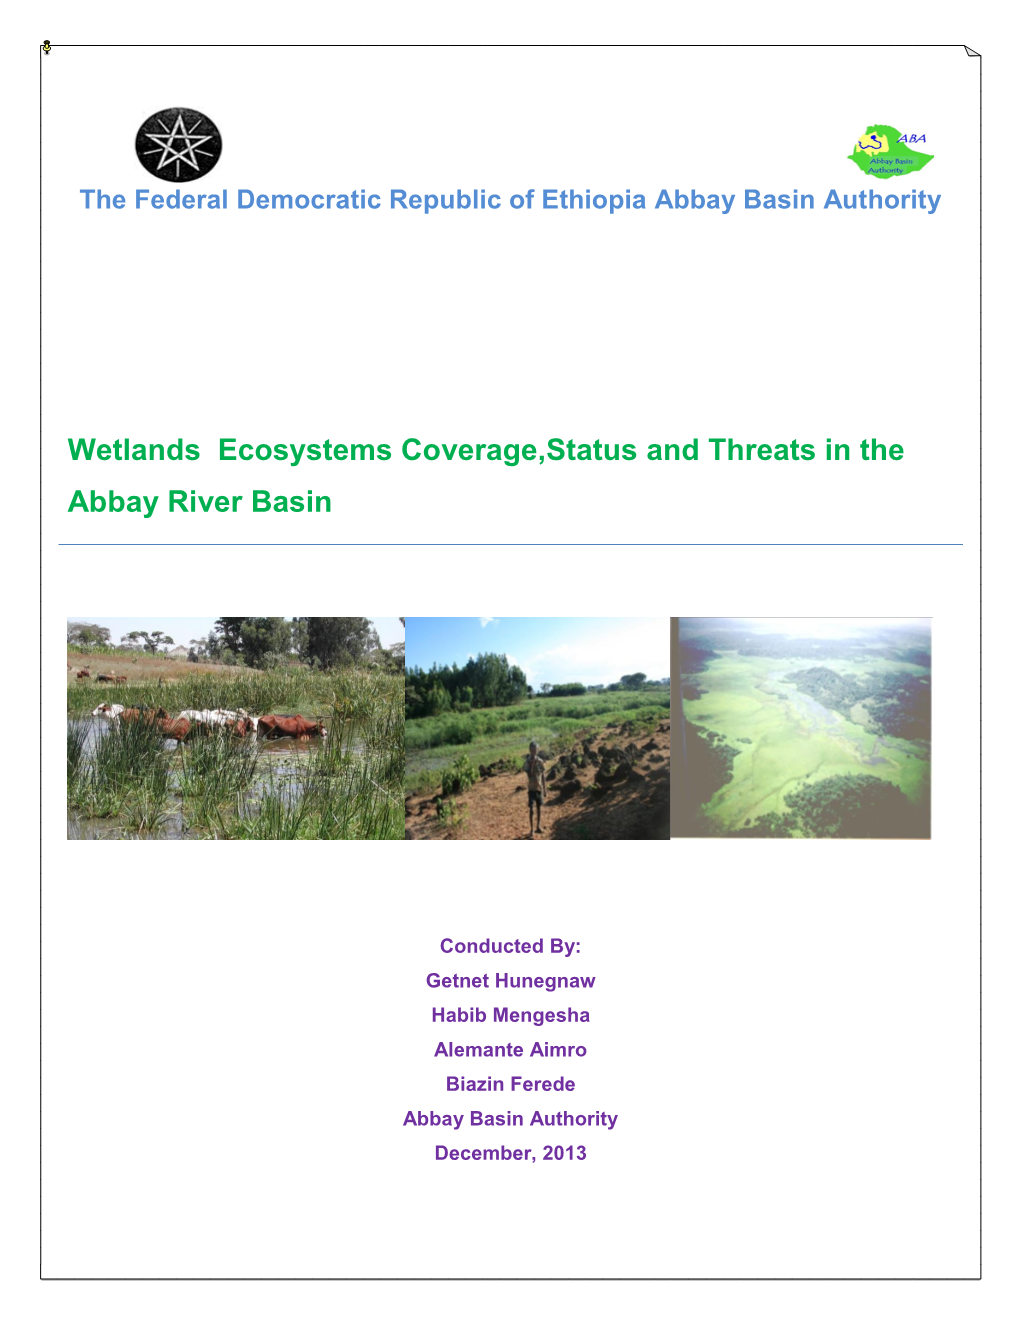 Preliminary Wetlands Assessment in the Abbay River Basin